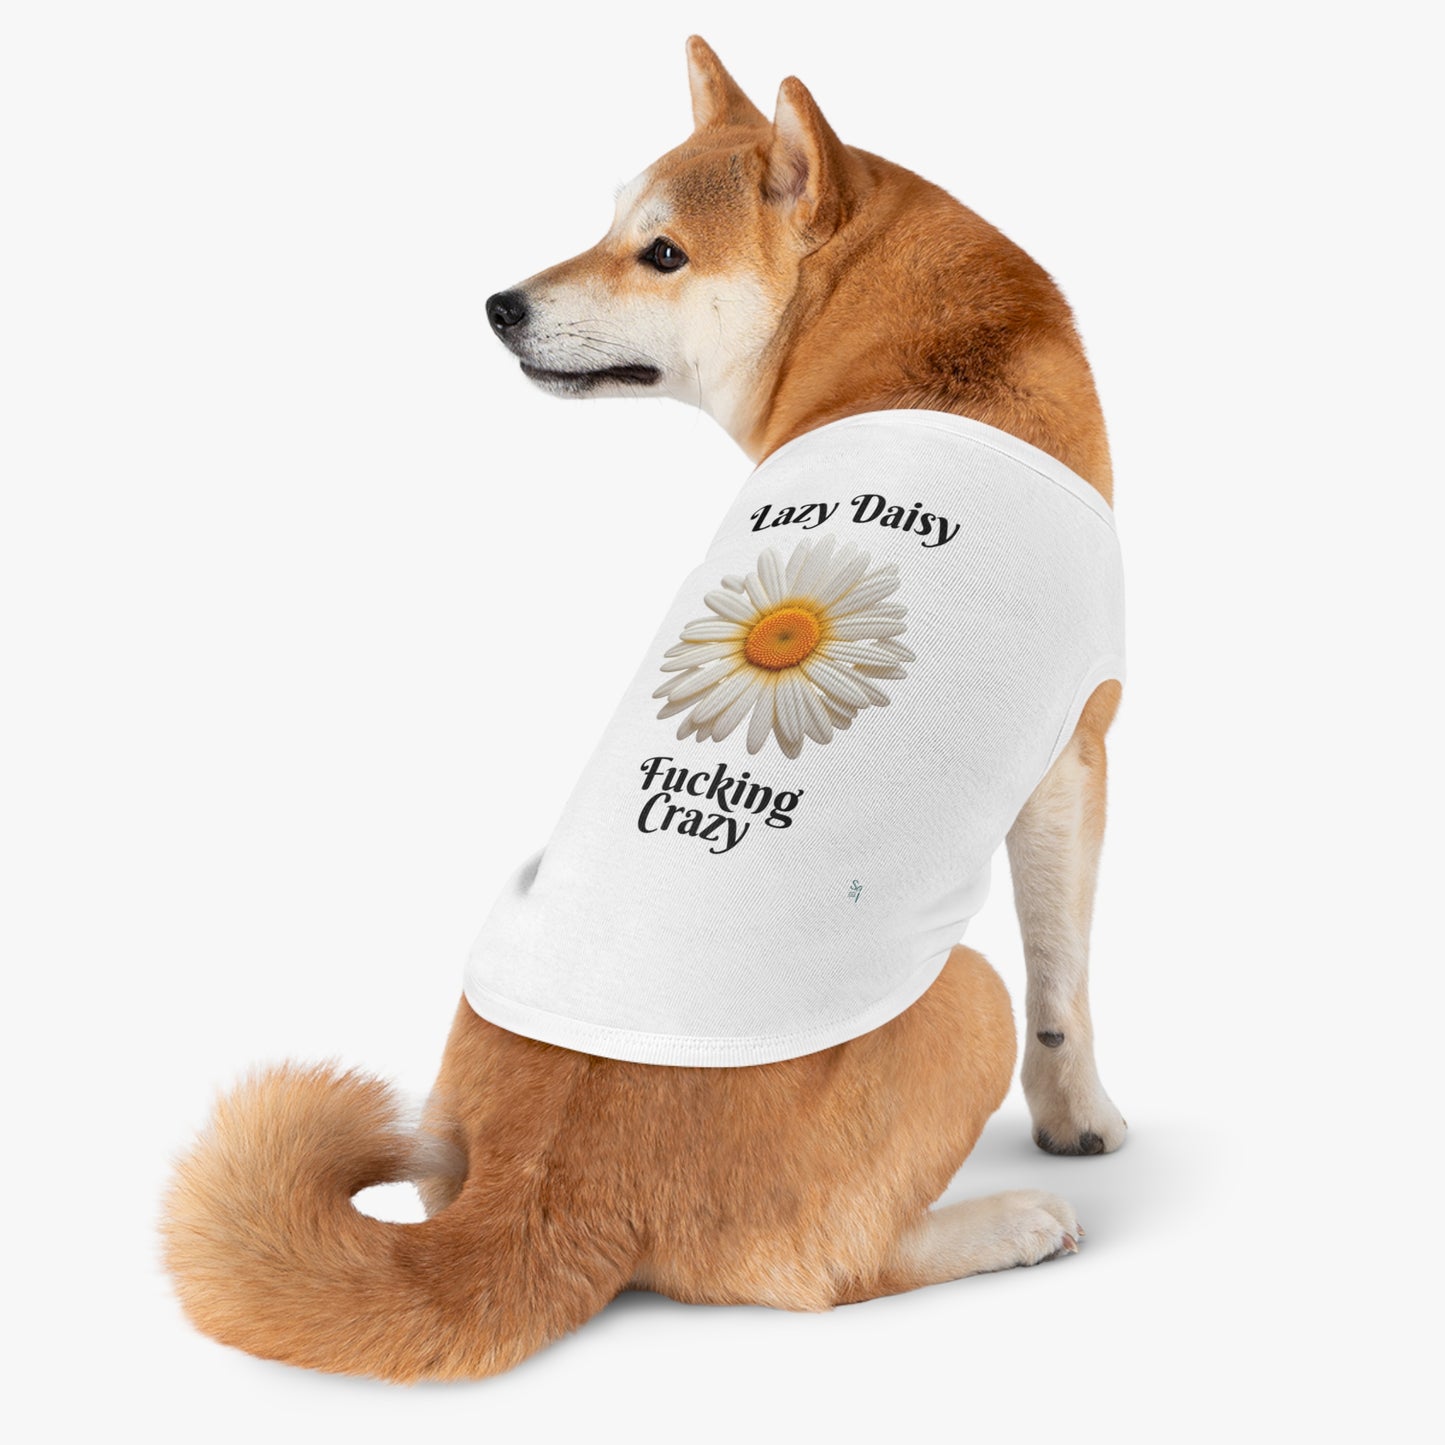 Lazy Daisy Fucking Crazy Pet Tank Top - Embrace the Quirkiness of Your Furry Friend